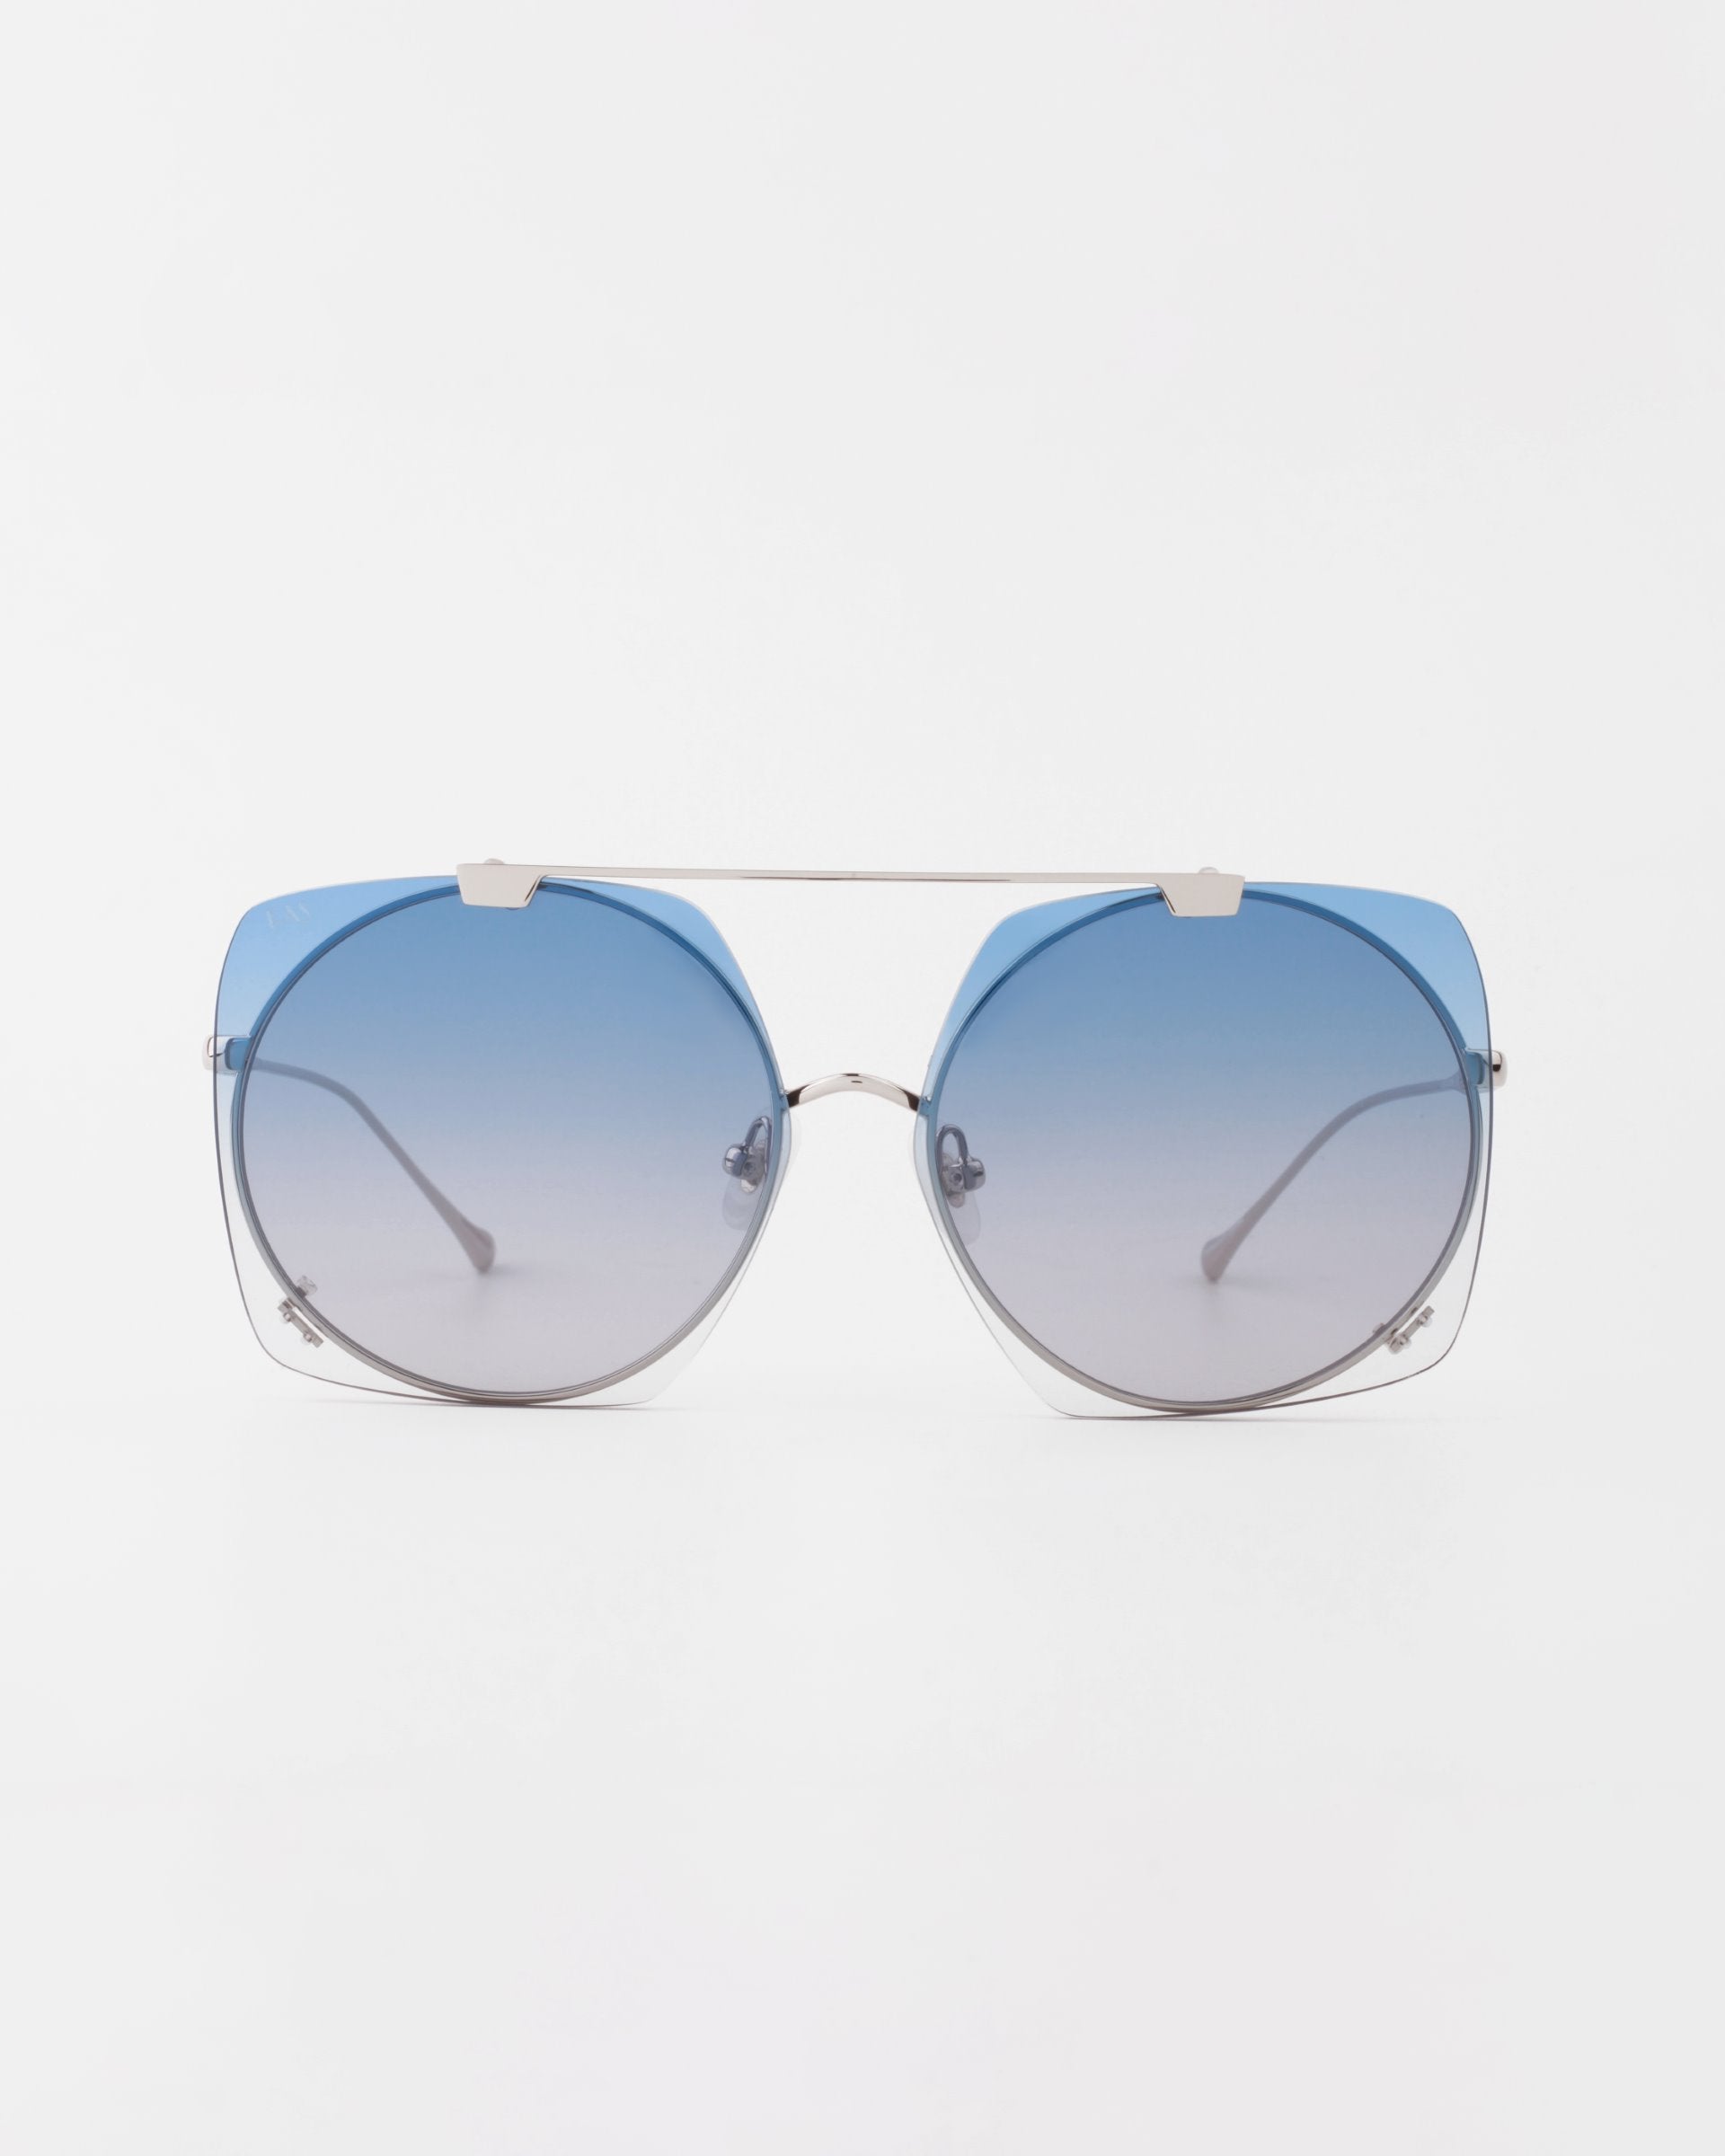 A pair of stylish For Art&#39;s Sake® Last Summer sunglasses with large, round, gradient lenses that fade from dark blue at the top to clear at the bottom. The UVA &amp; UVB-protected glasses feature thin, silver metal frames and a double bridge design. The background is plain white.